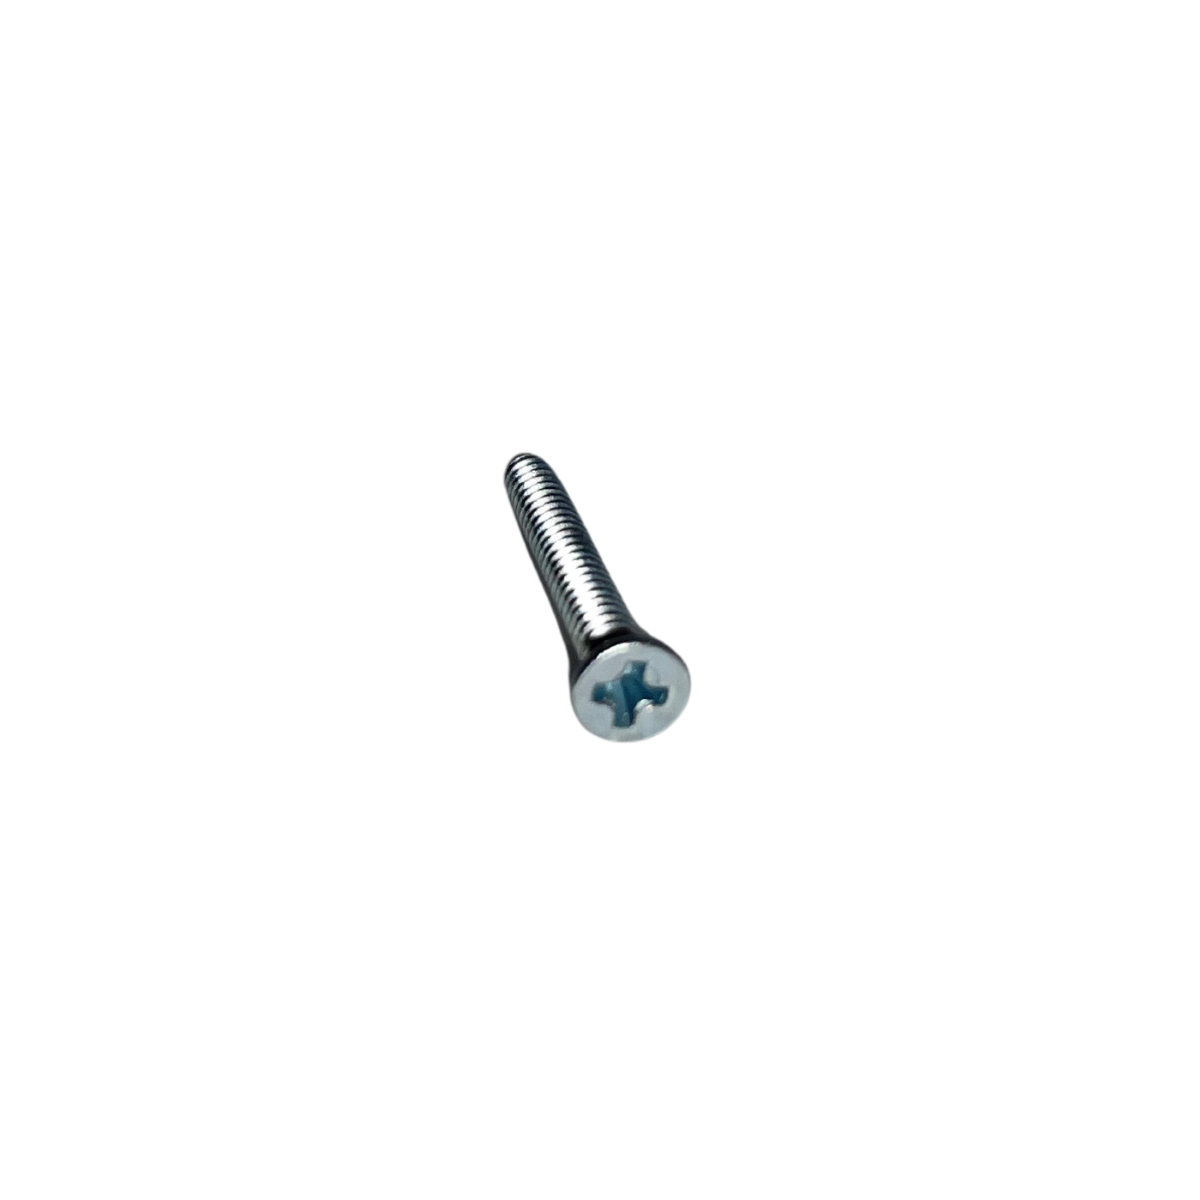 RTS screw, 4-40 x 3/4; for BP325 case